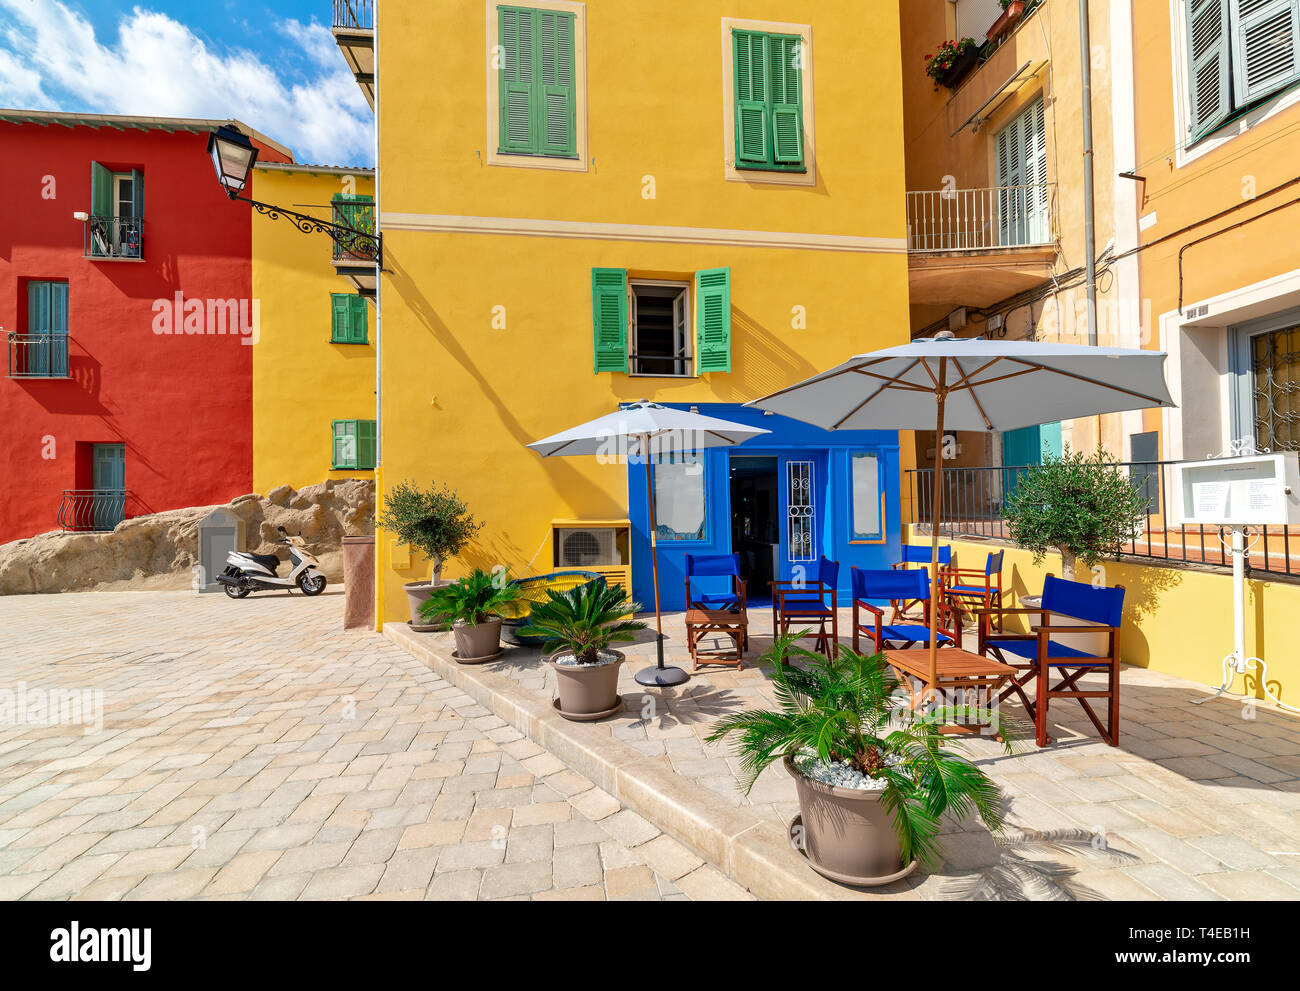 Small outdoor restaurant and colorful houses in Menton, France. Stock Photo